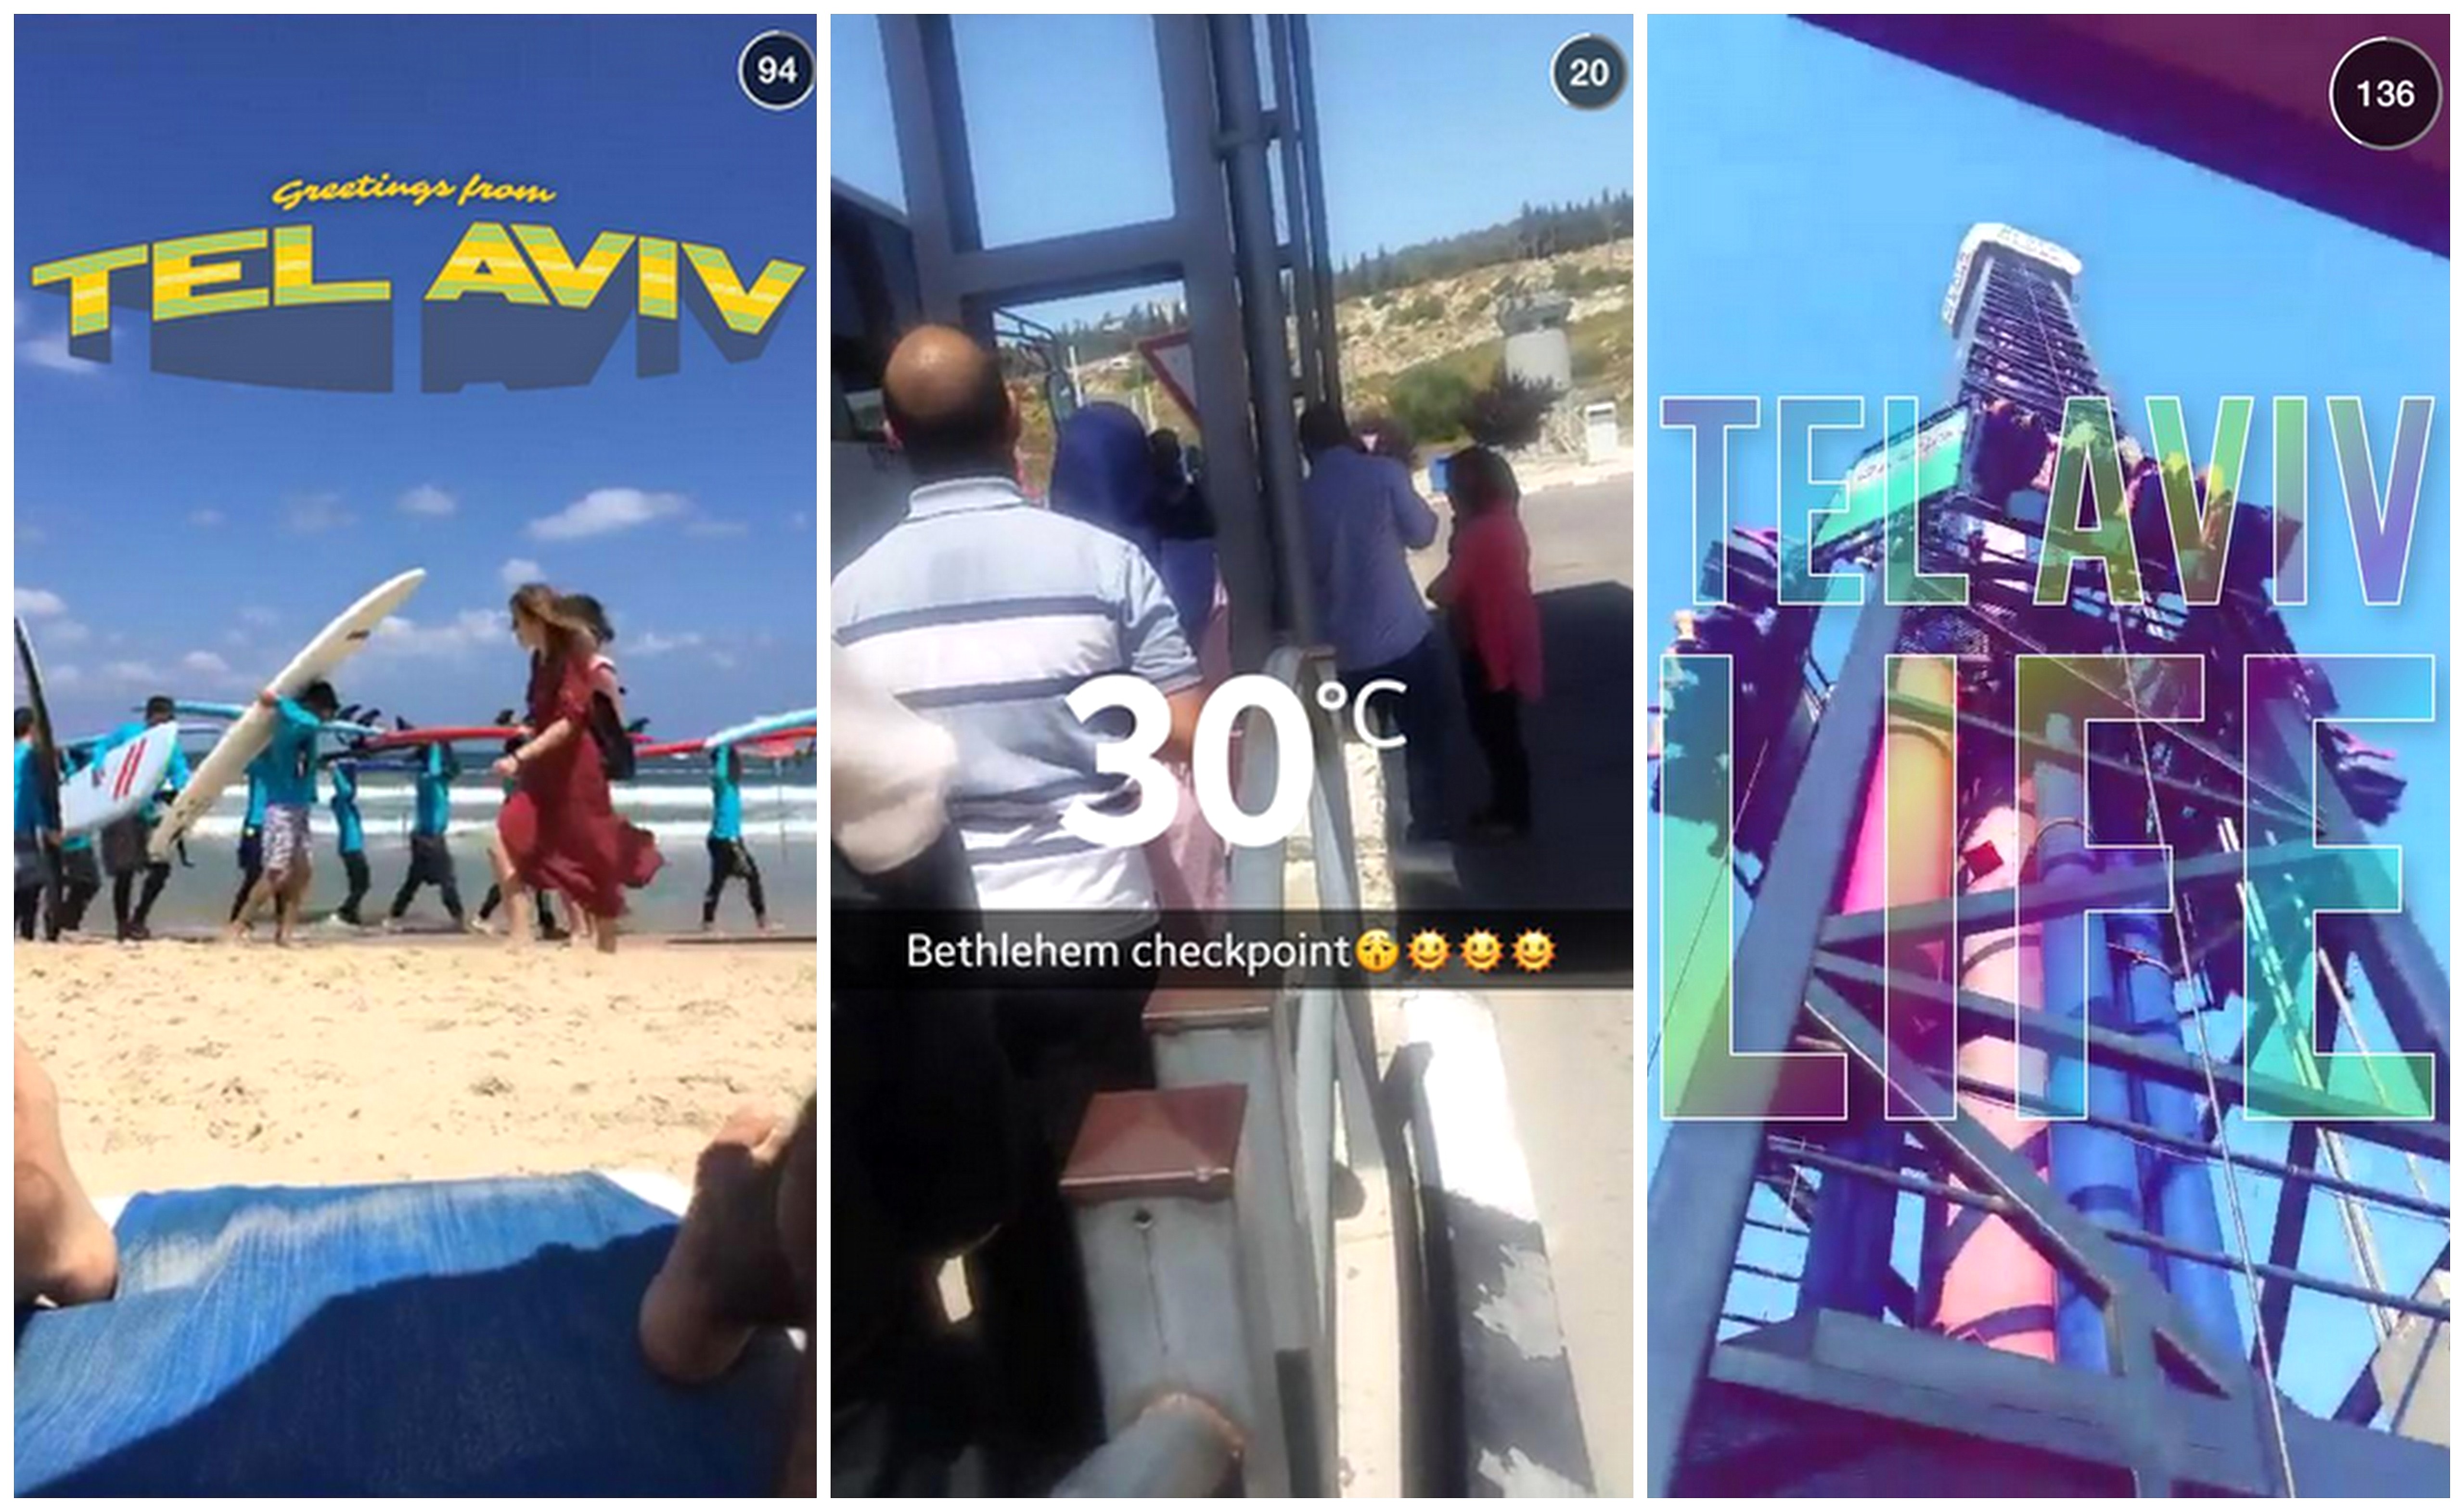 Snapchat Under Fire for Featuring Tel Aviv and Sets Up West Bank Live